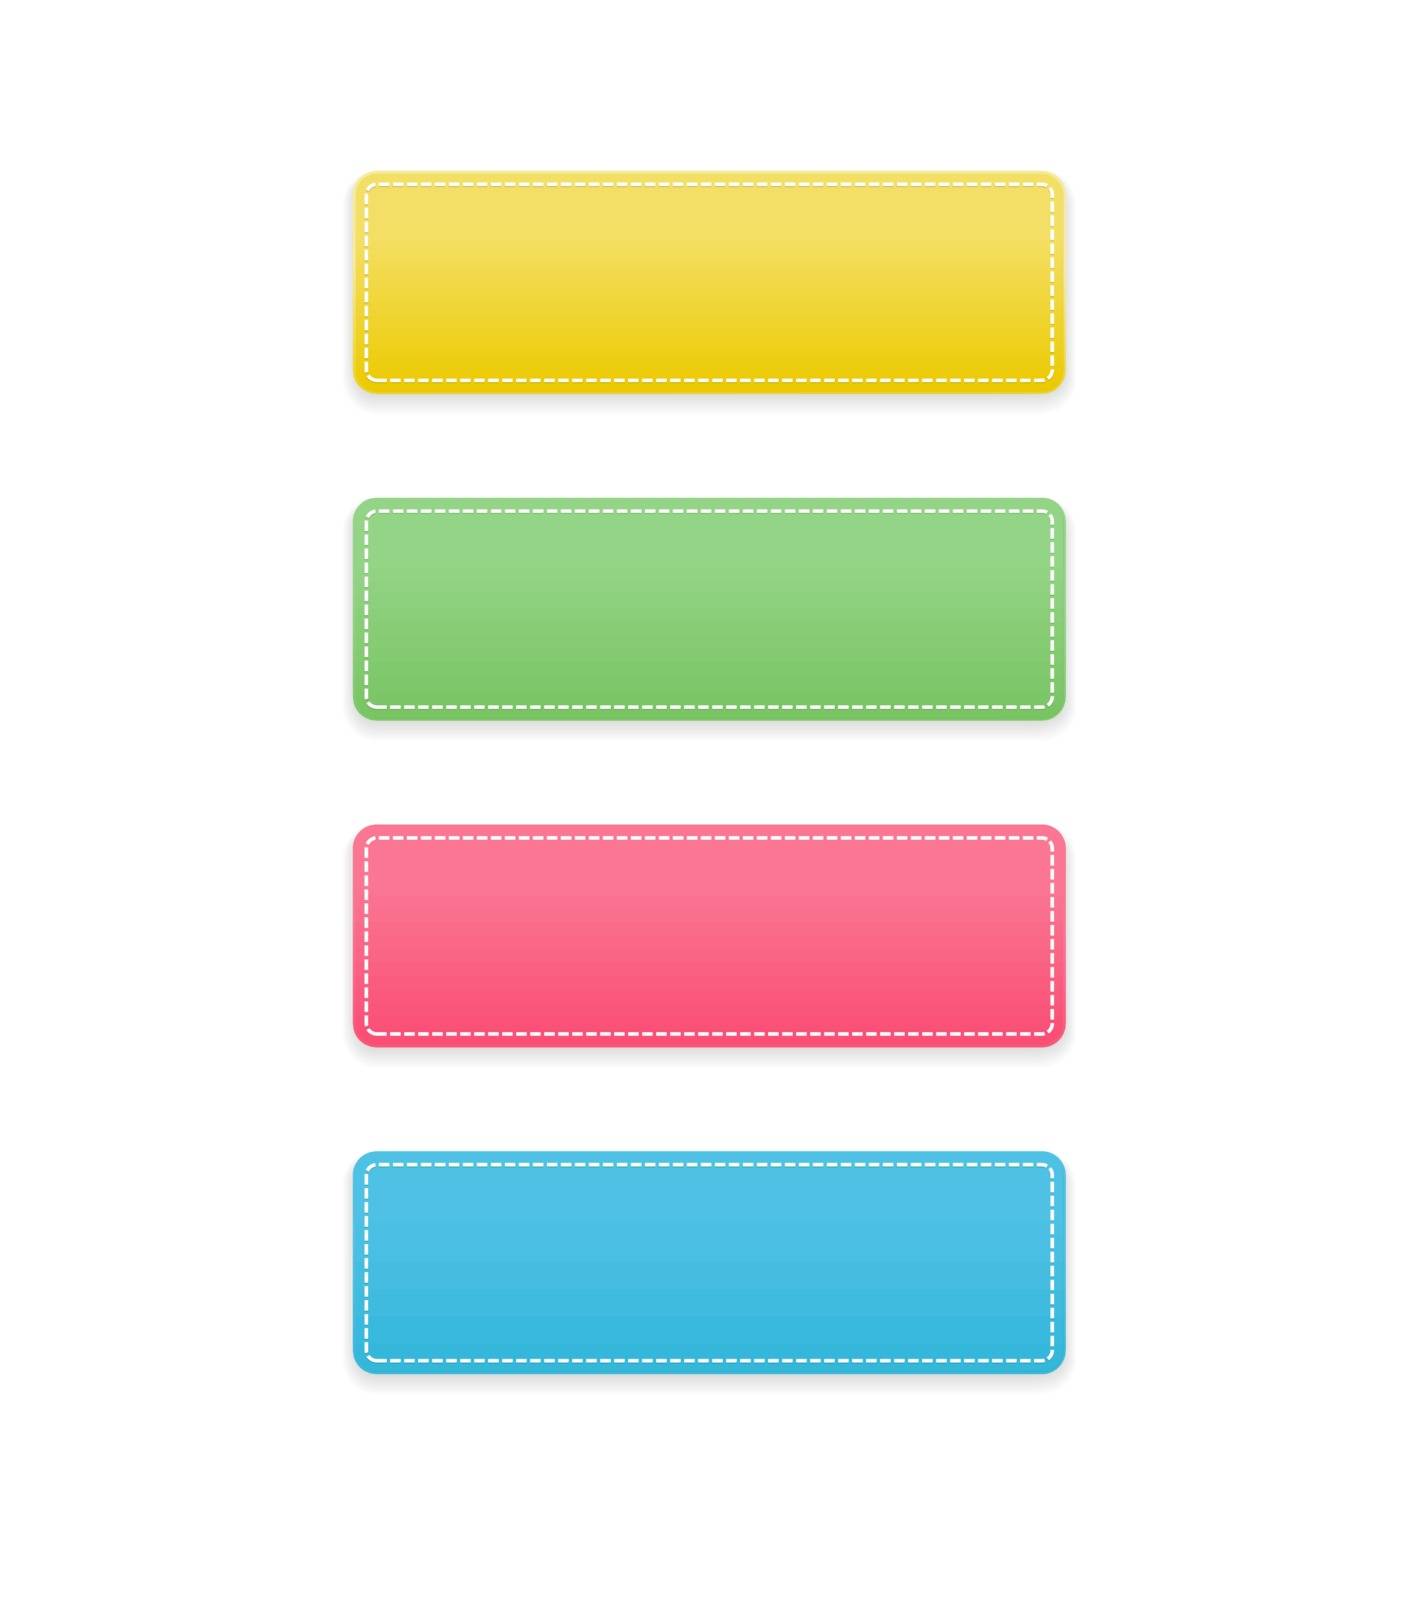 The set of yellow, green, pink and blue rectangle buttons with a stitched effect